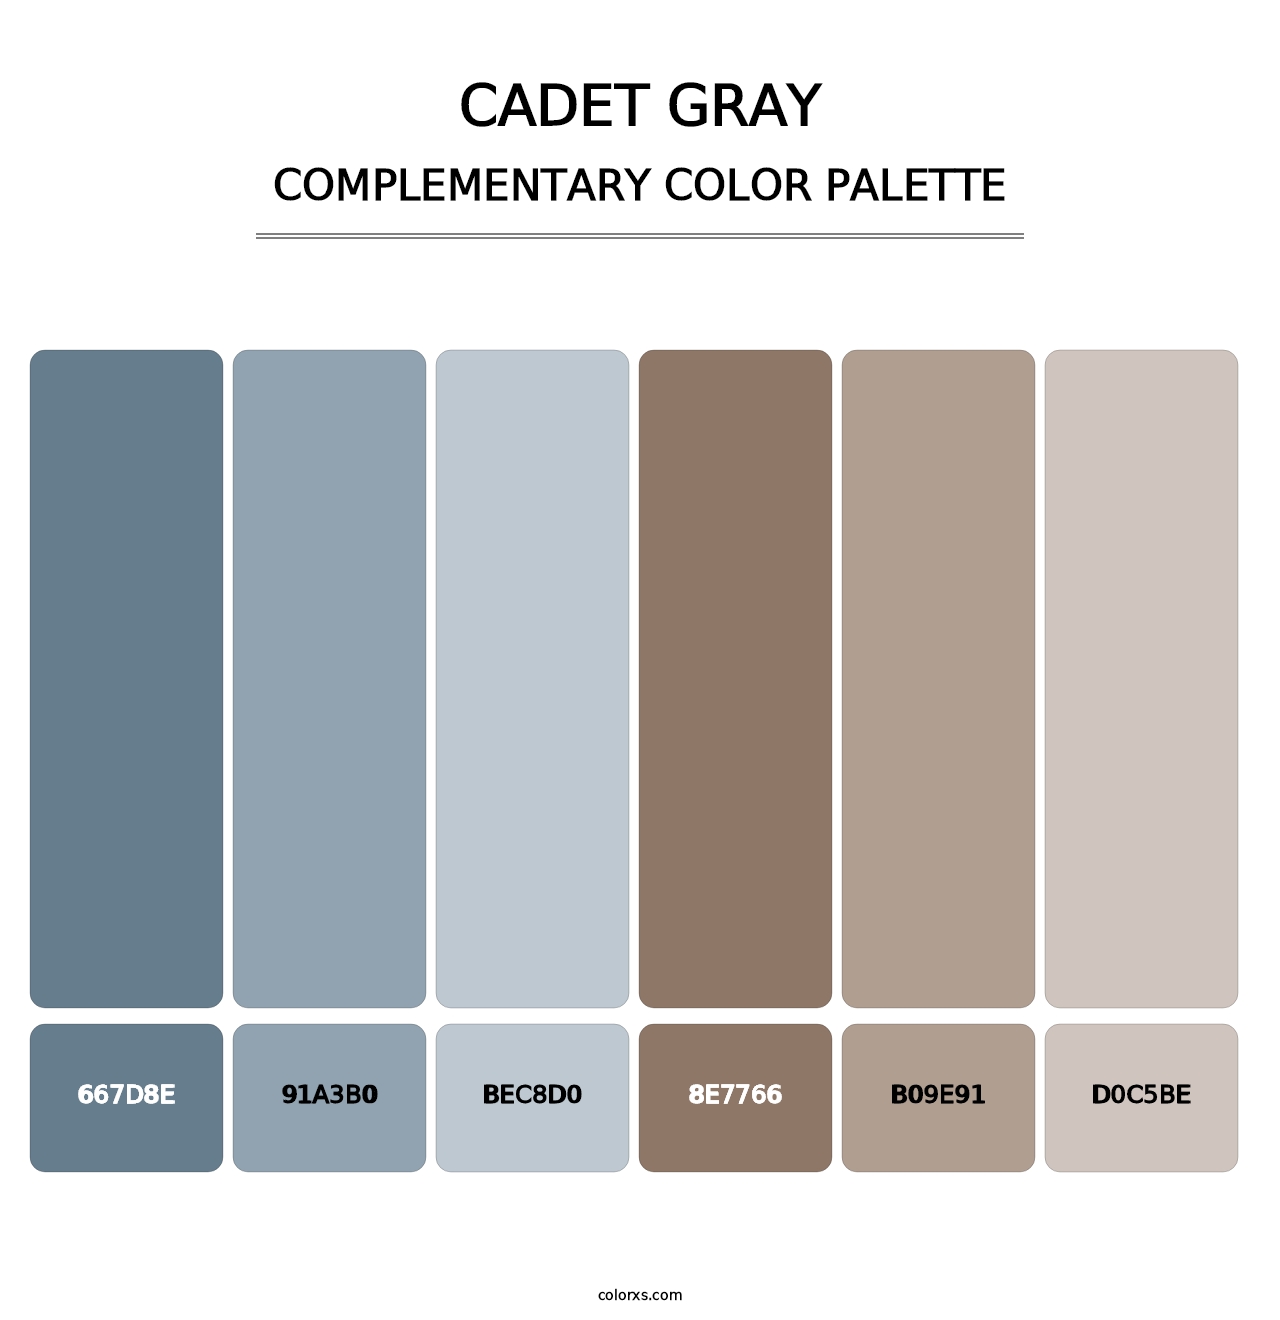 Cadet Gray - Complementary Color Palette